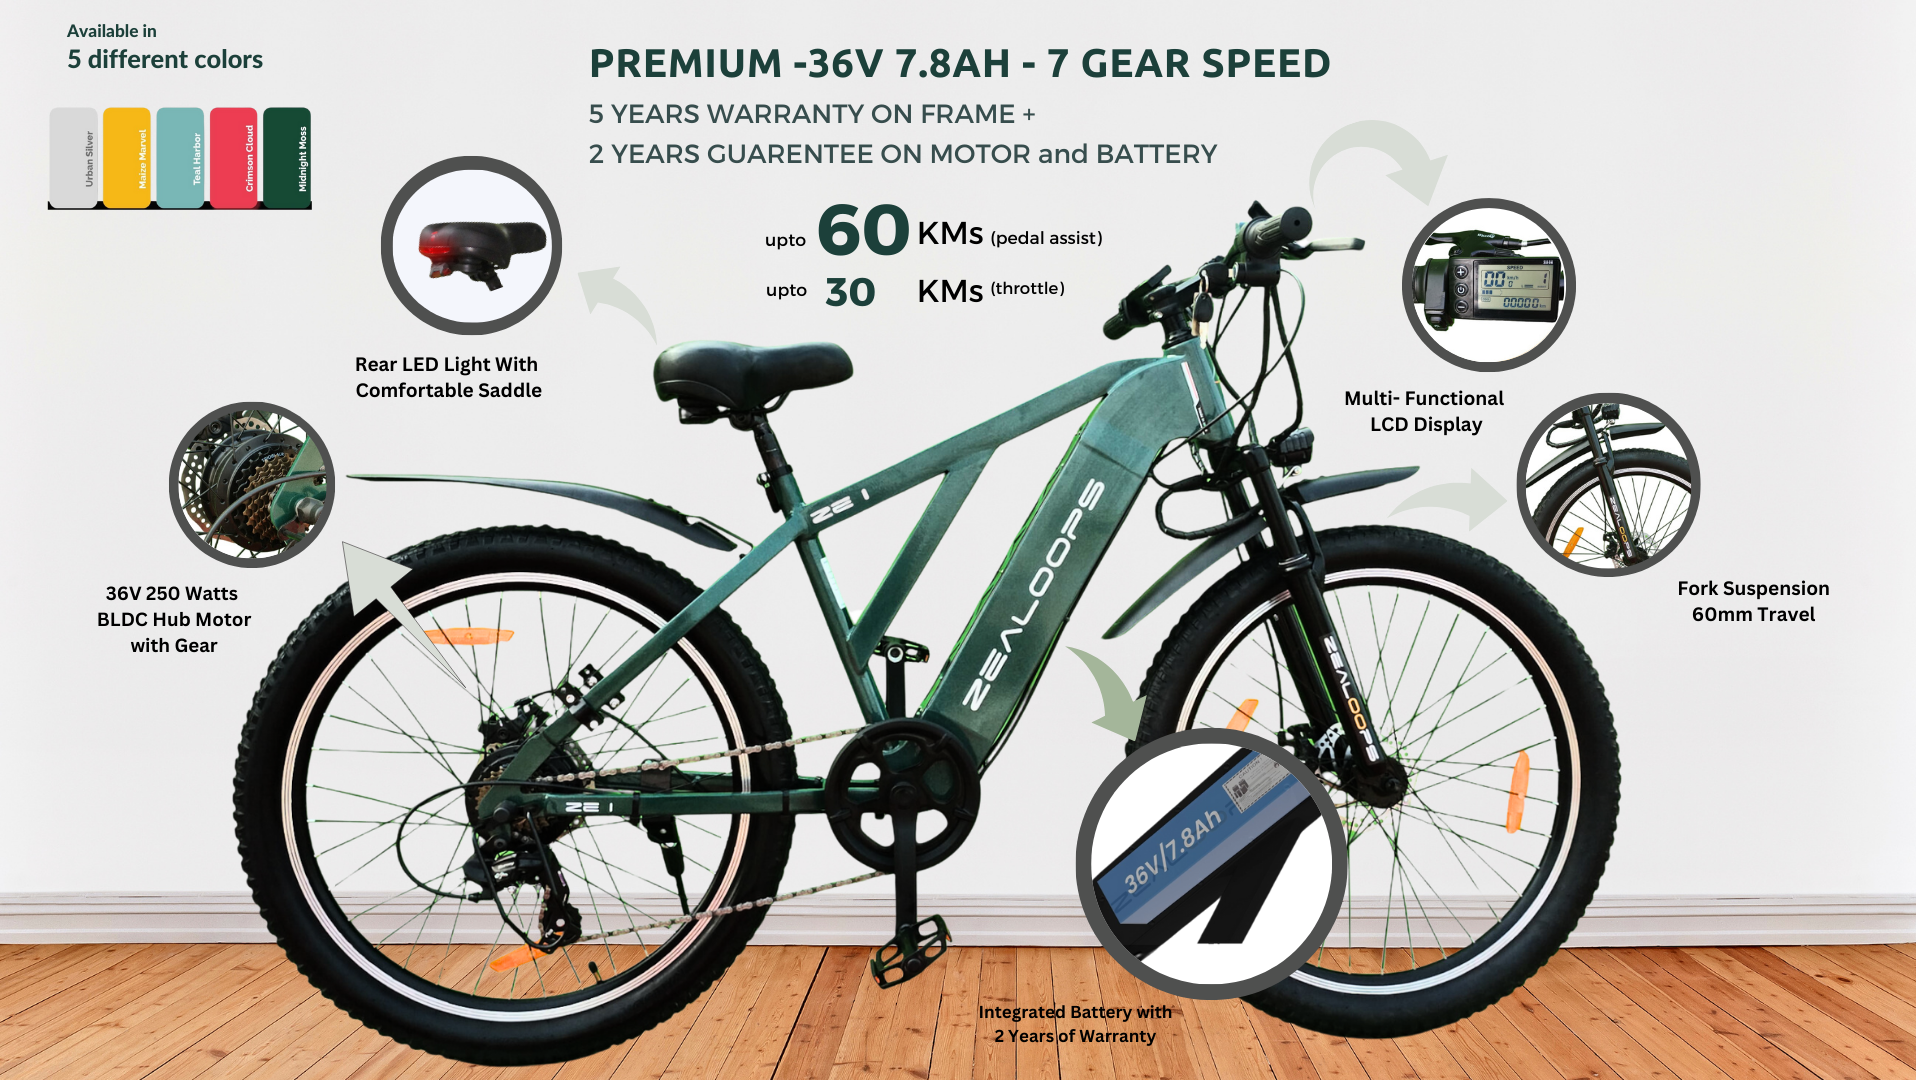 ZE1 PREMIUM - 36V 7.8AH -  with Gear and Multi-Functional Display